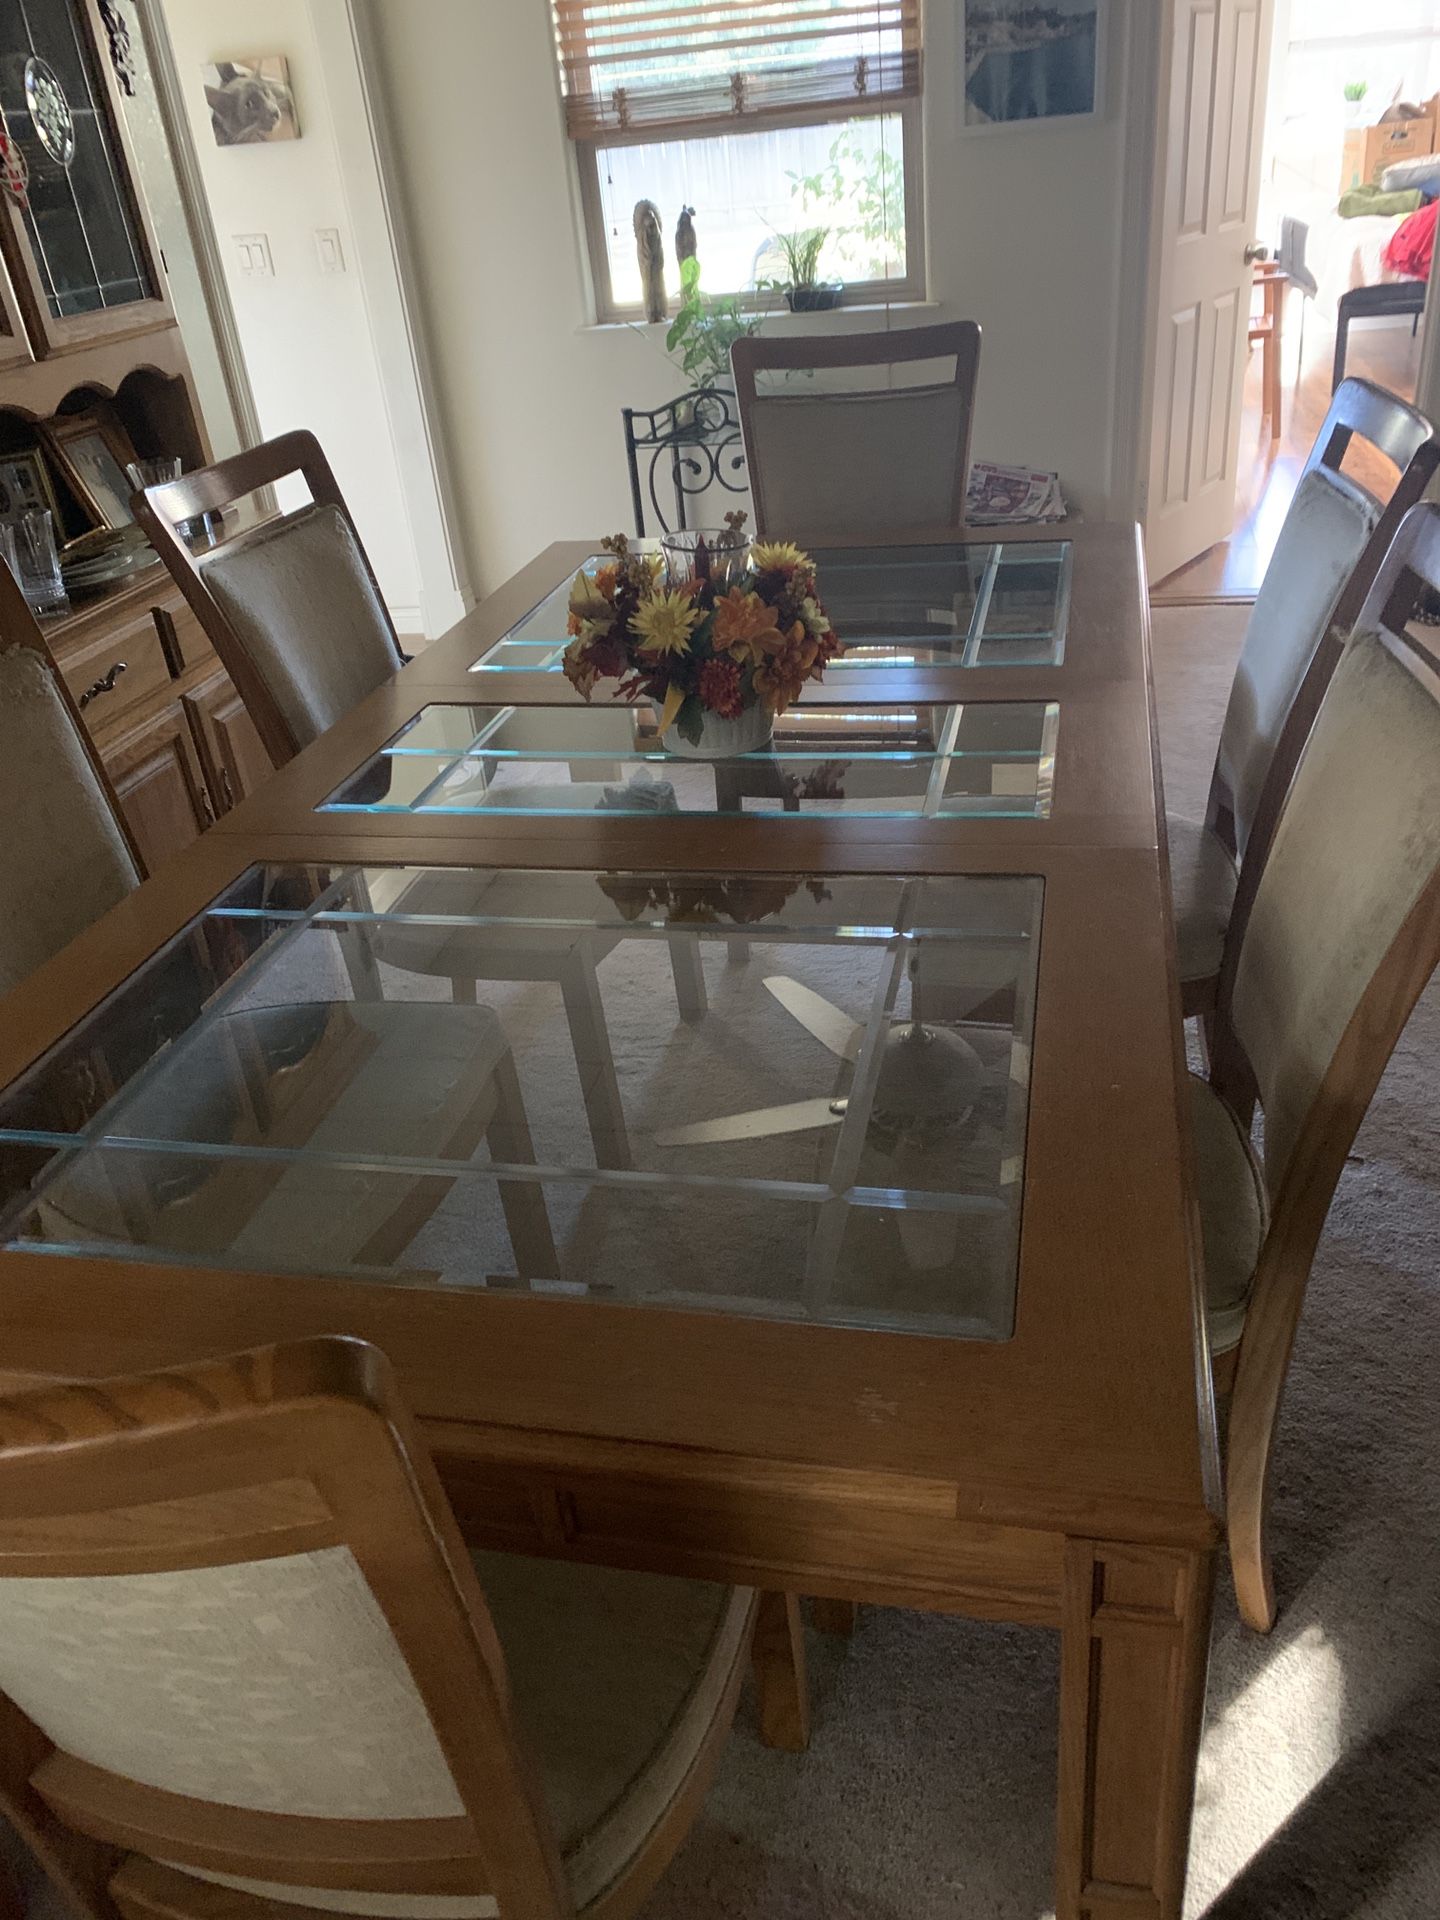 Beautiful Maple and glass Dining Room Set, Seats 4, 6 Or 8, With 2 Leafs. Table Pulls apart. 6 Chairs. Chairs might need Reopostering.